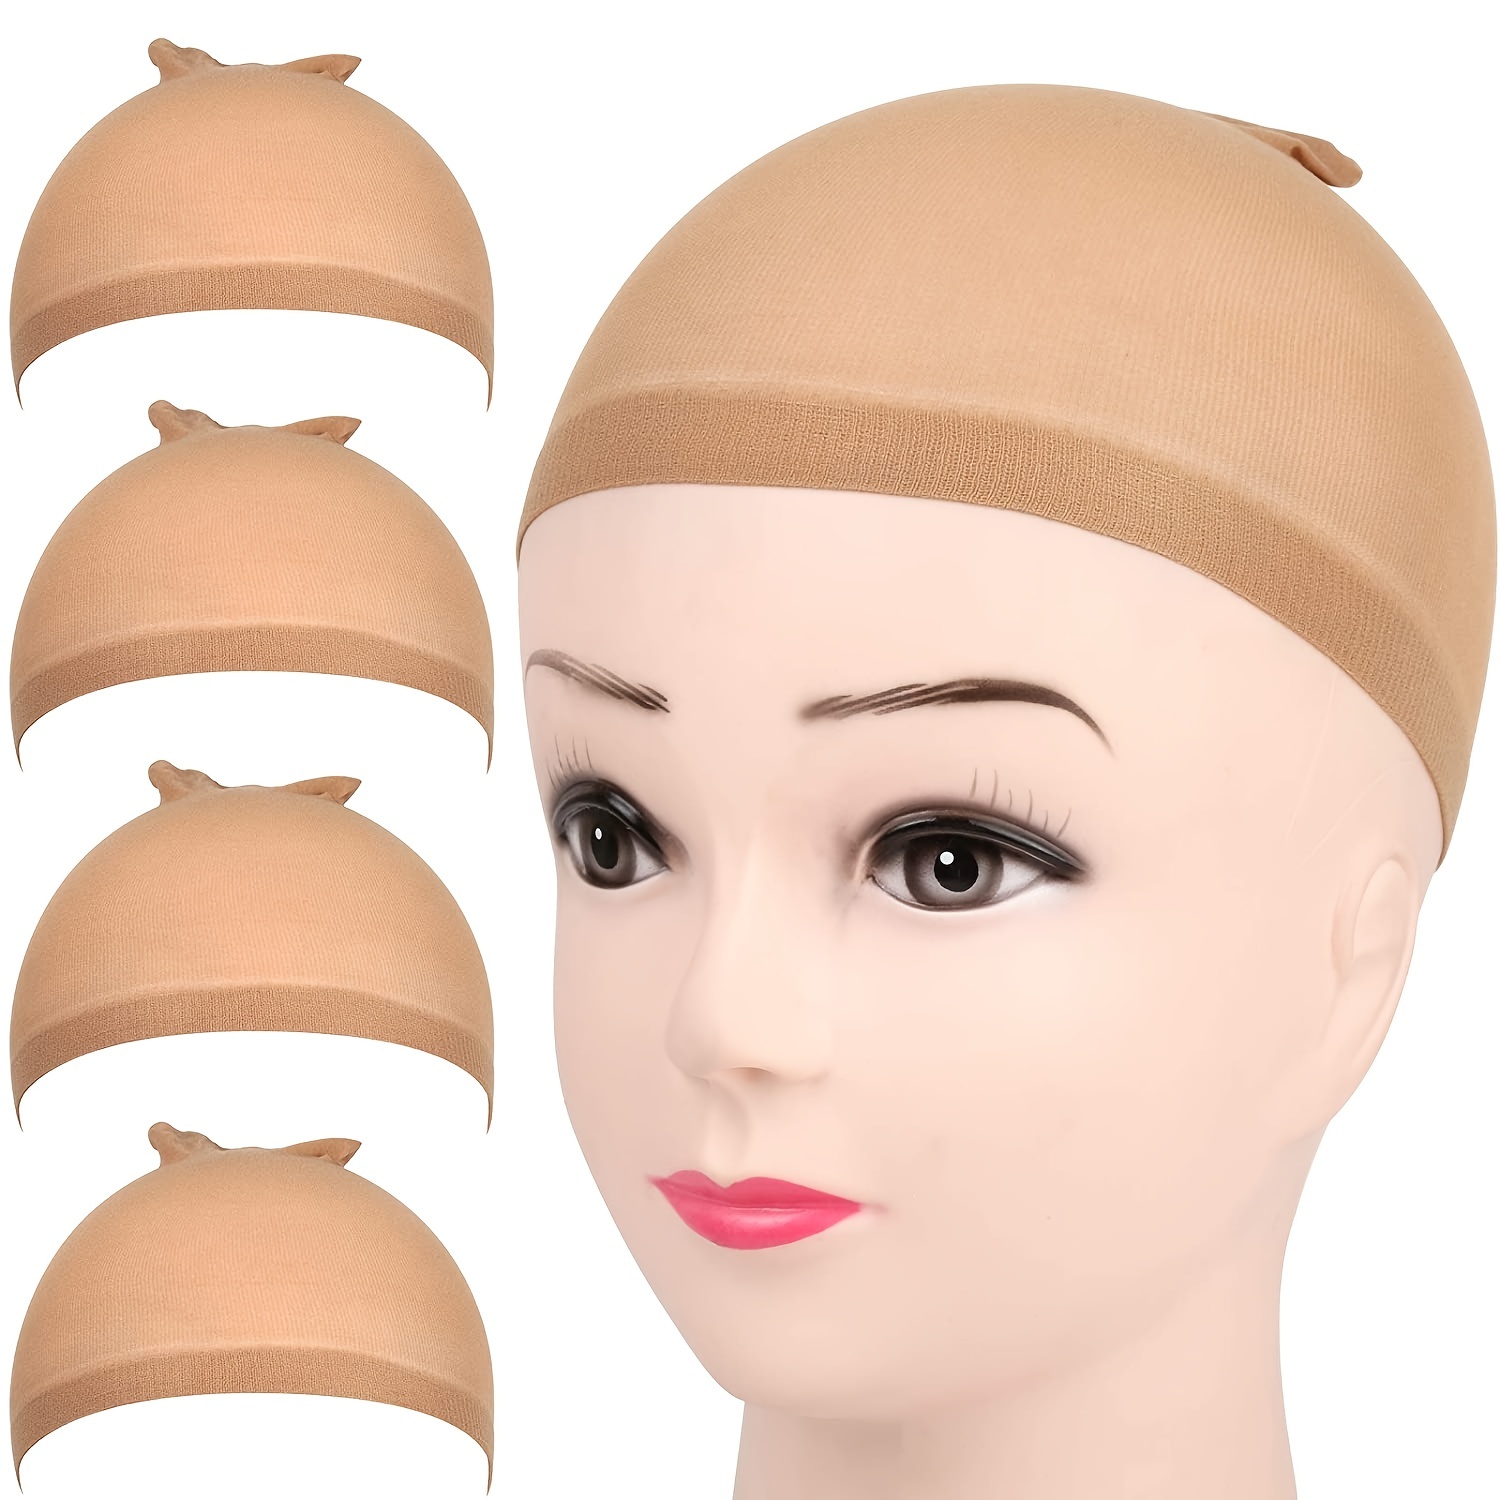 12 Pieces Light Brown Wig Caps For Women